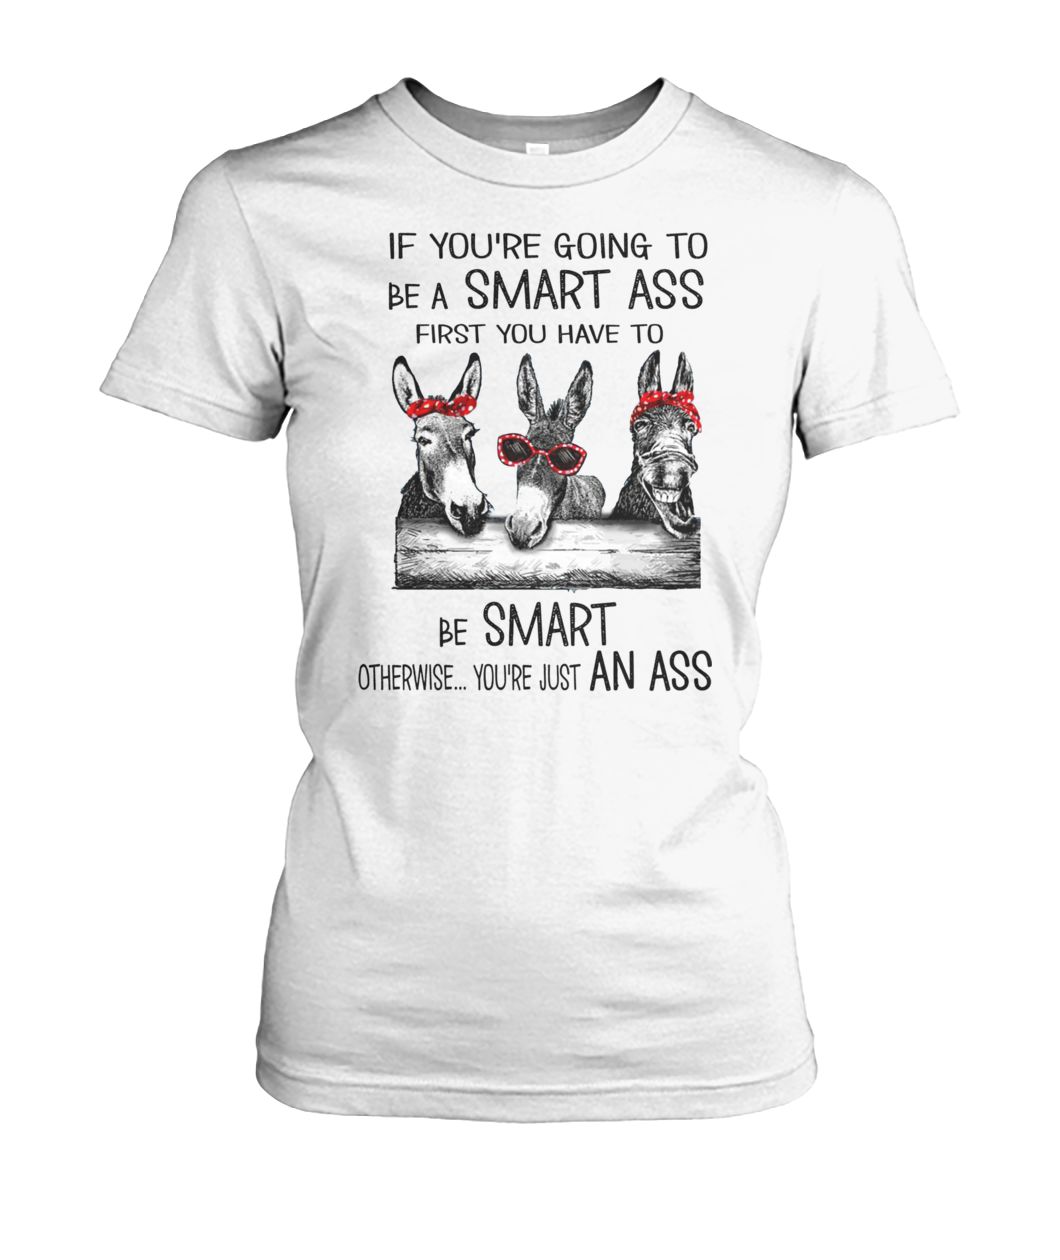 Donkey If you're going to be smart ass first you have to be smart otherwise you're just an ass women's crew tee